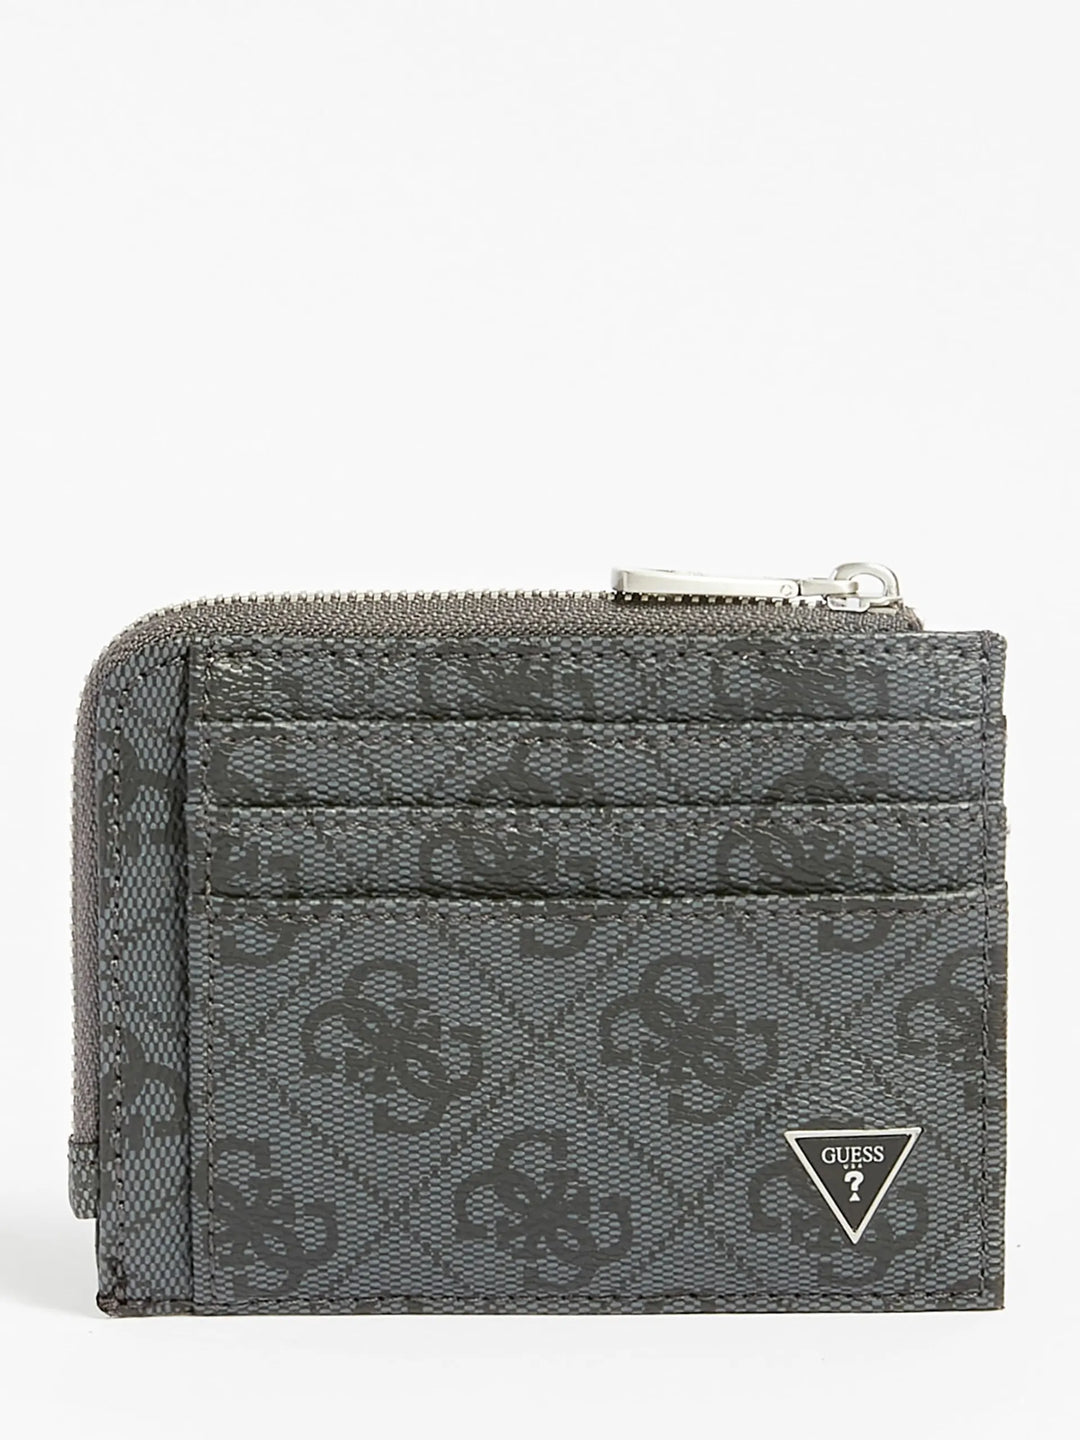 VEZZOLA MULTIPLE CARD CASE WITH ZIPPER - Guess